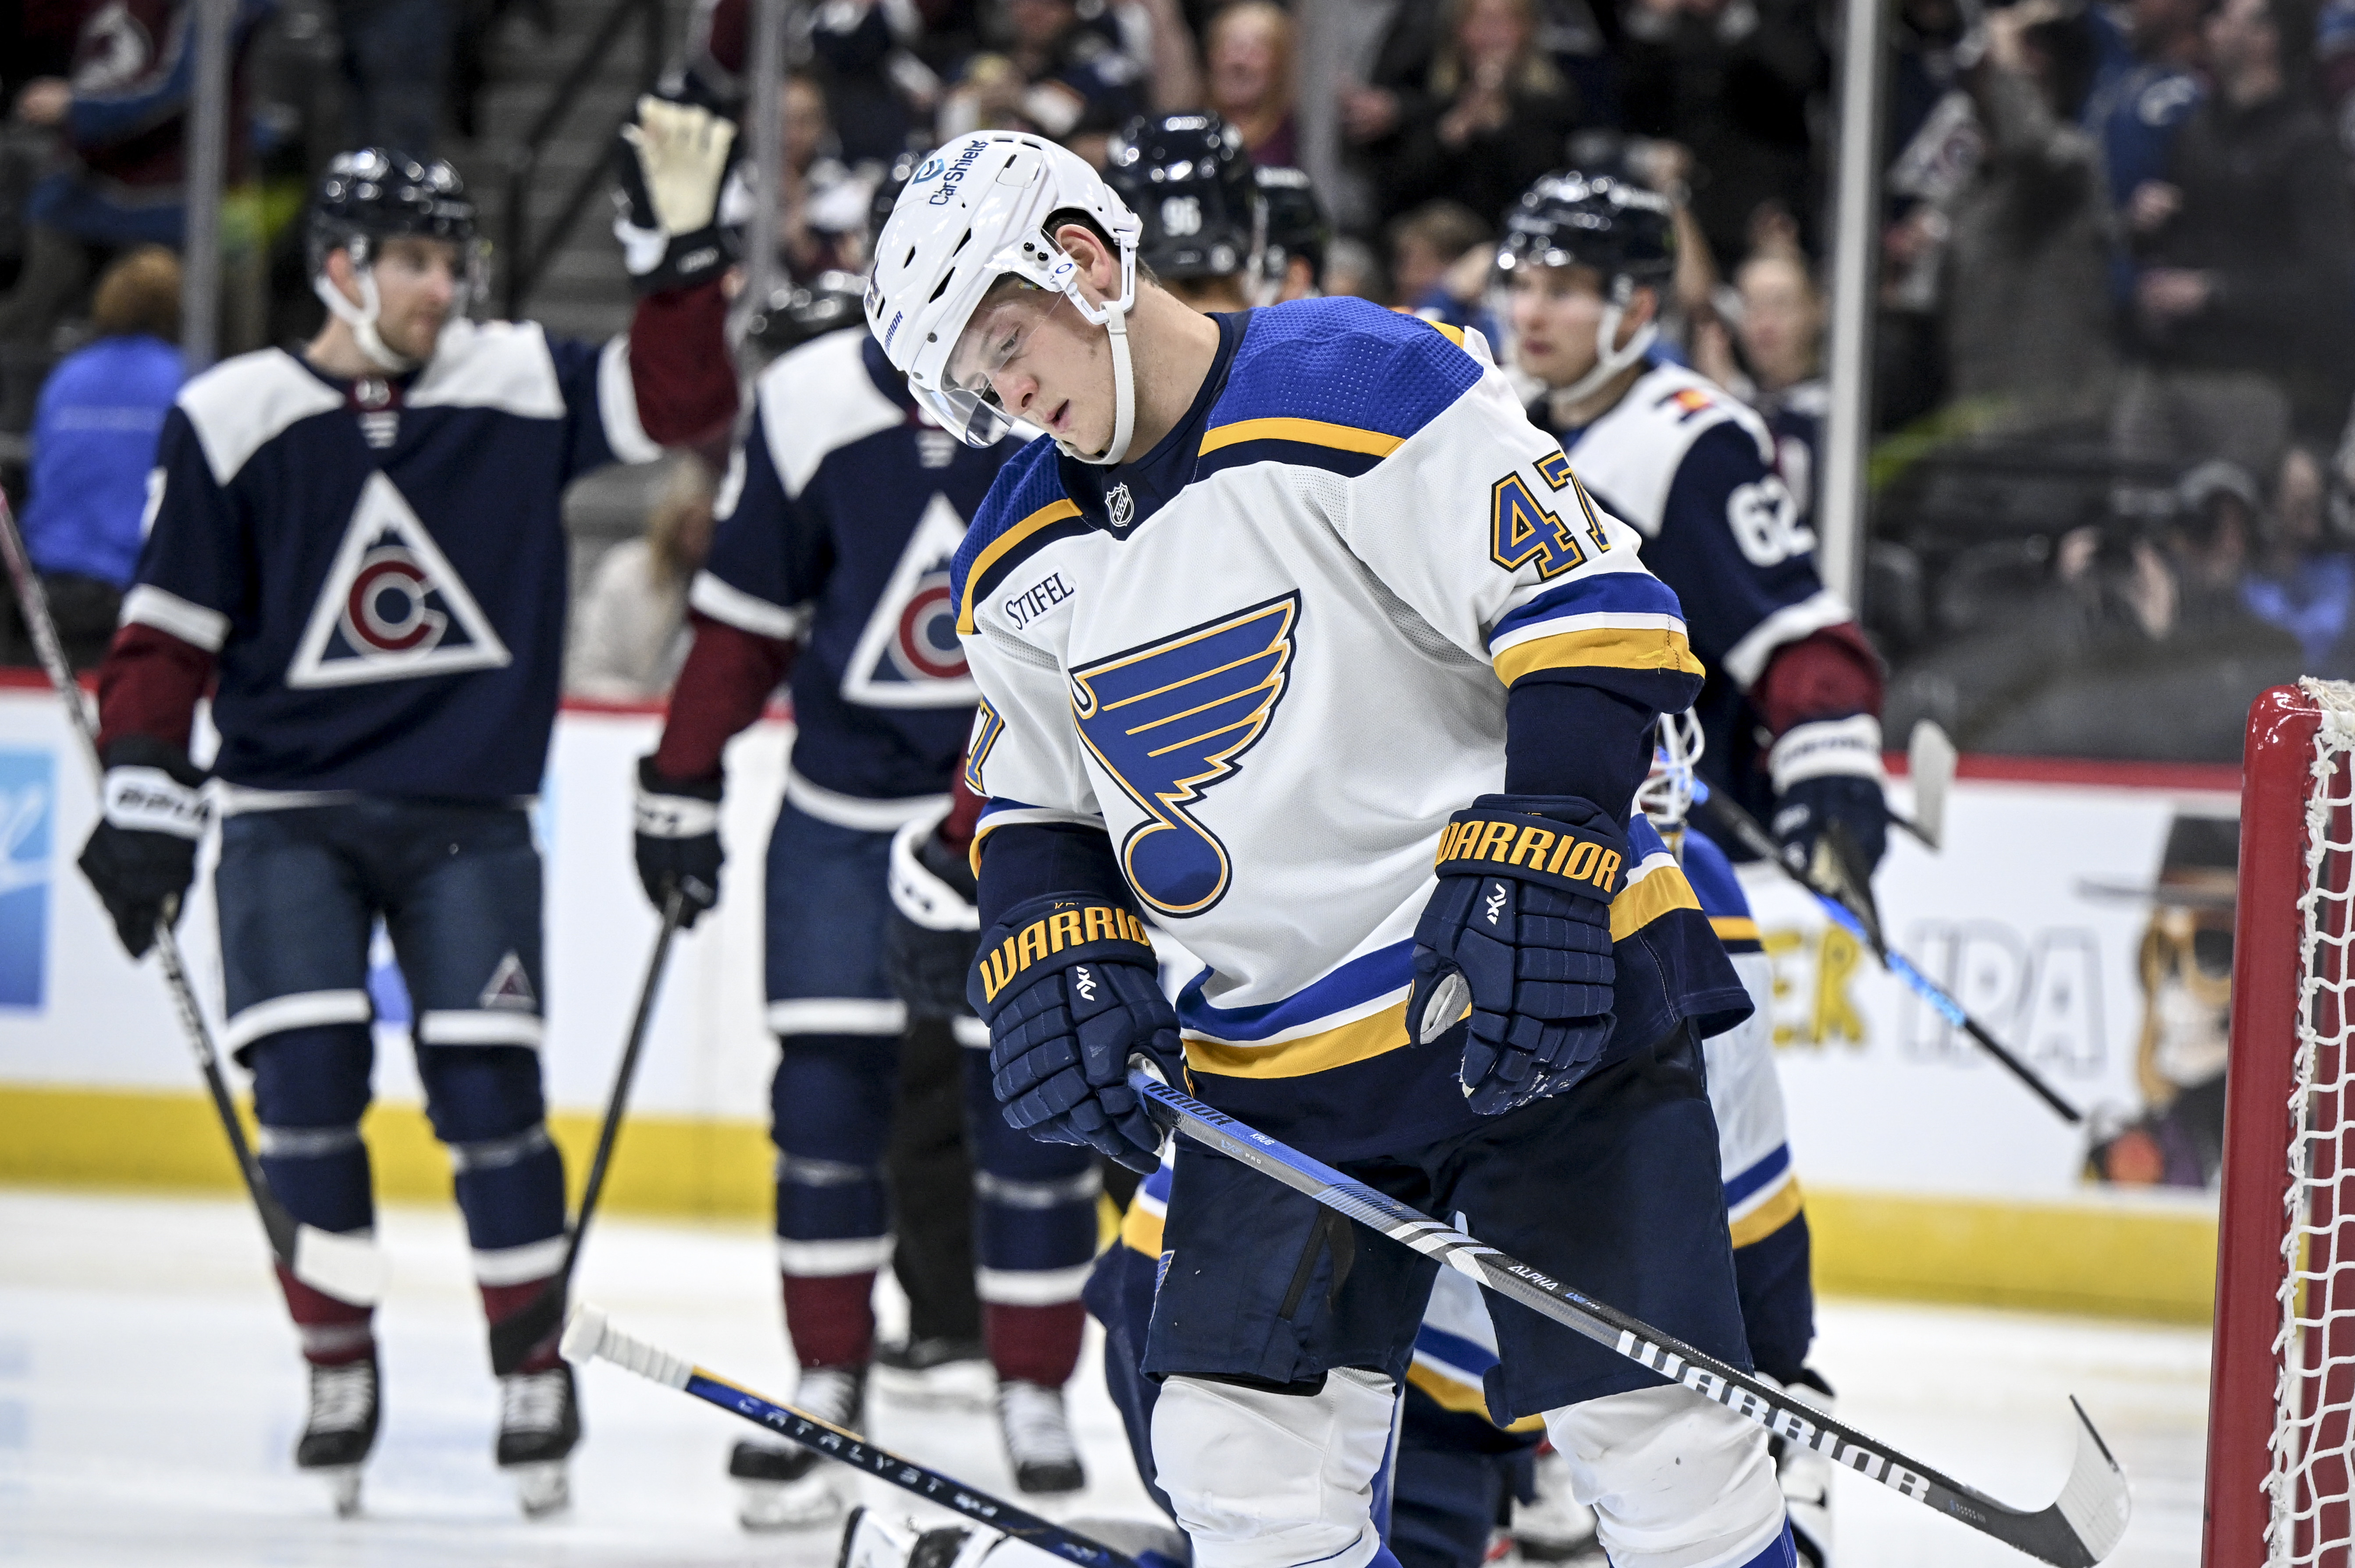 St. Louis Blues defenseman collapses on bench during game in Anaheim -  ABC17NEWS